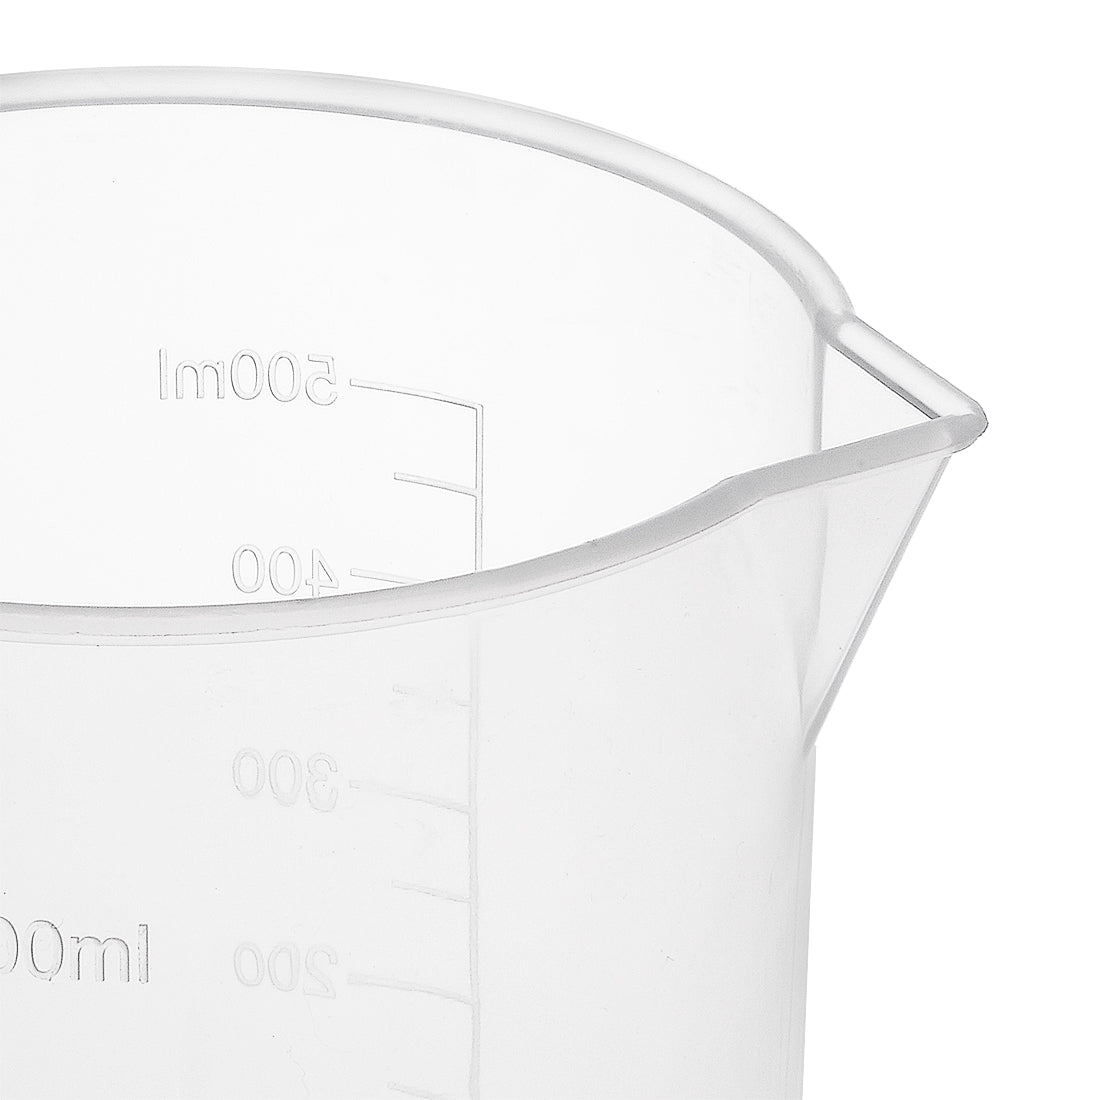 uxcell Uxcell 3pcs Laboratory Clear White PP 500mL Measuring Cup Handled Beaker